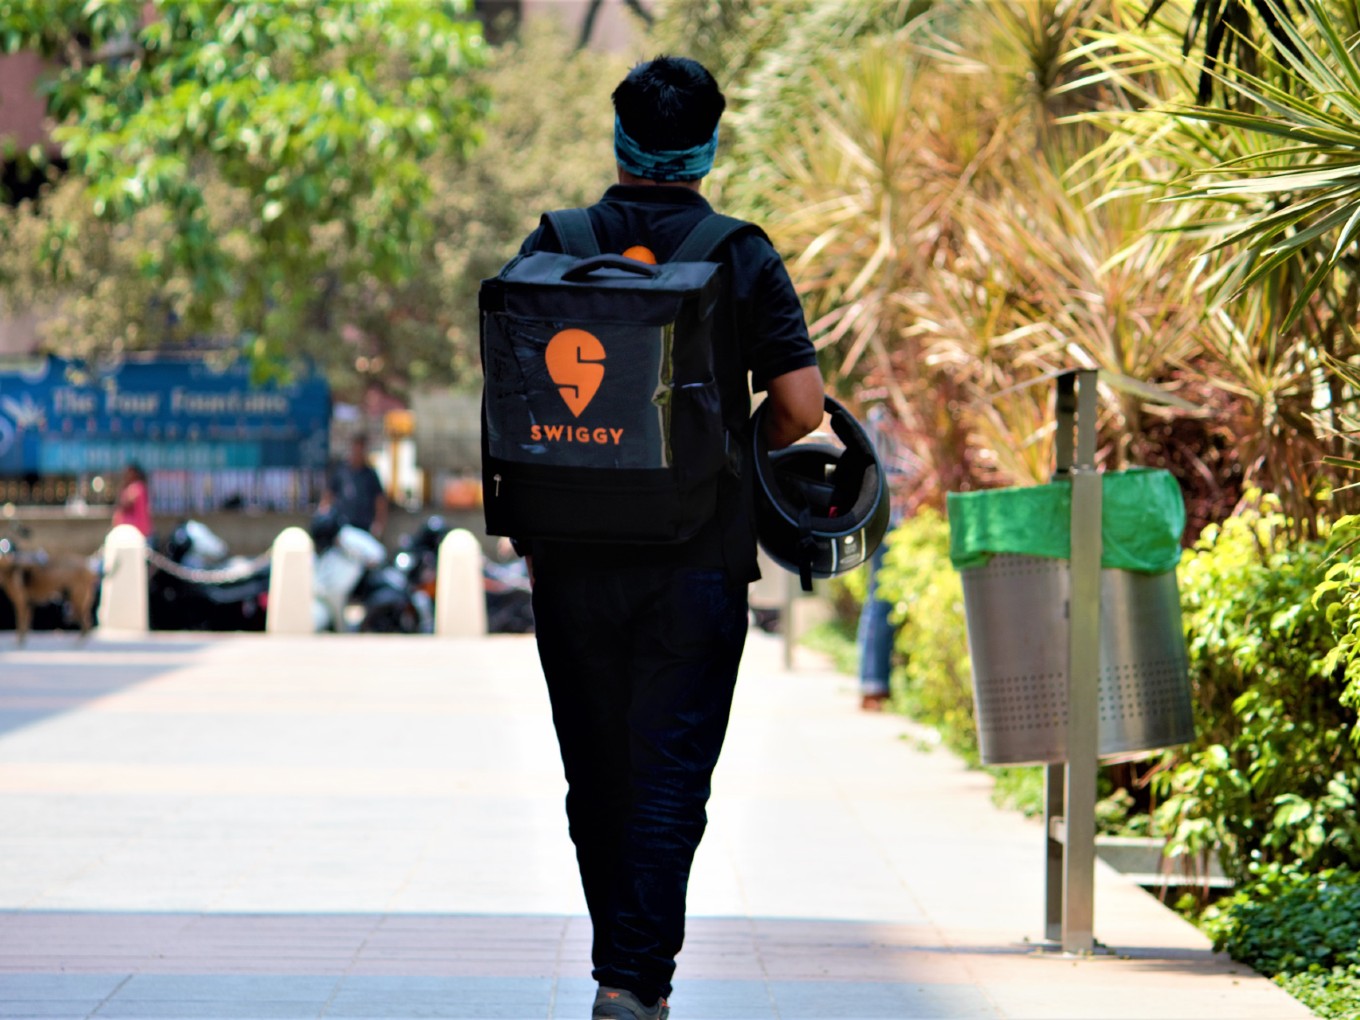 Swiggy To Cut 400 Jobs Ahead Of Planned IPO: Financial Improvements In Focus